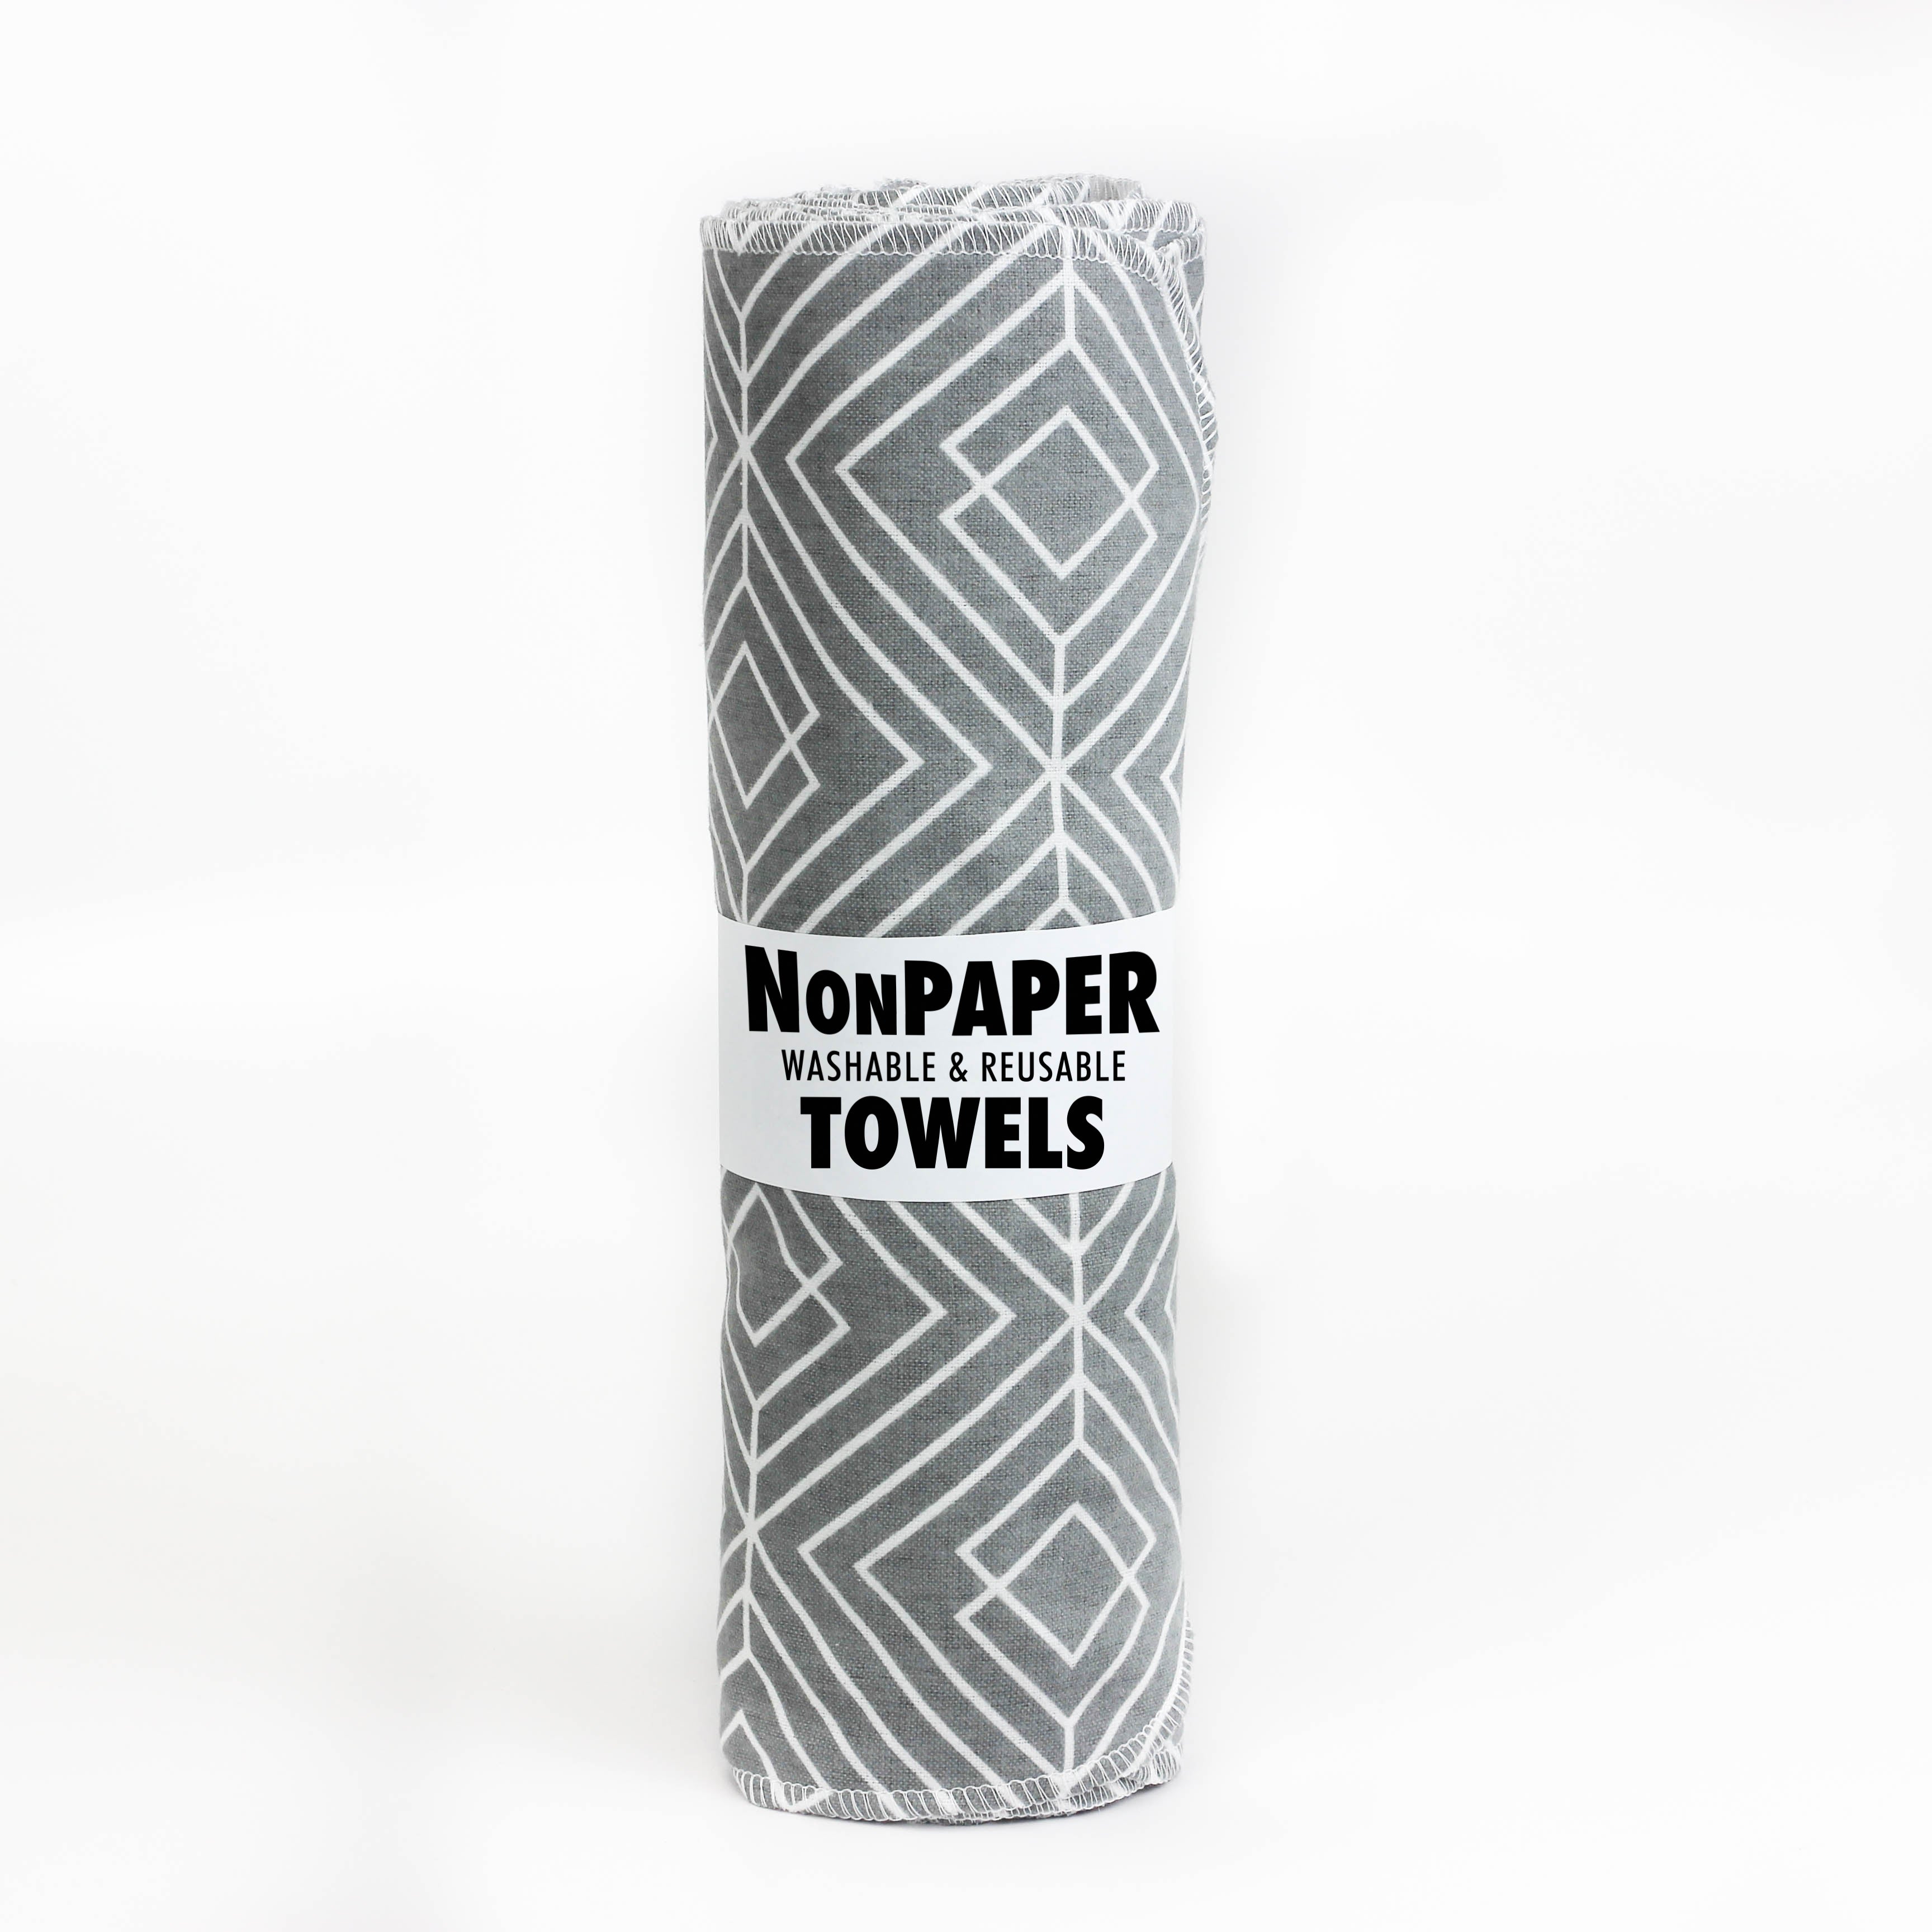 BOJUST Reusable Paper Towels Roll, 12 Eco Friendly Washable Cotton Flannel  Towels w/Cardboard Roll